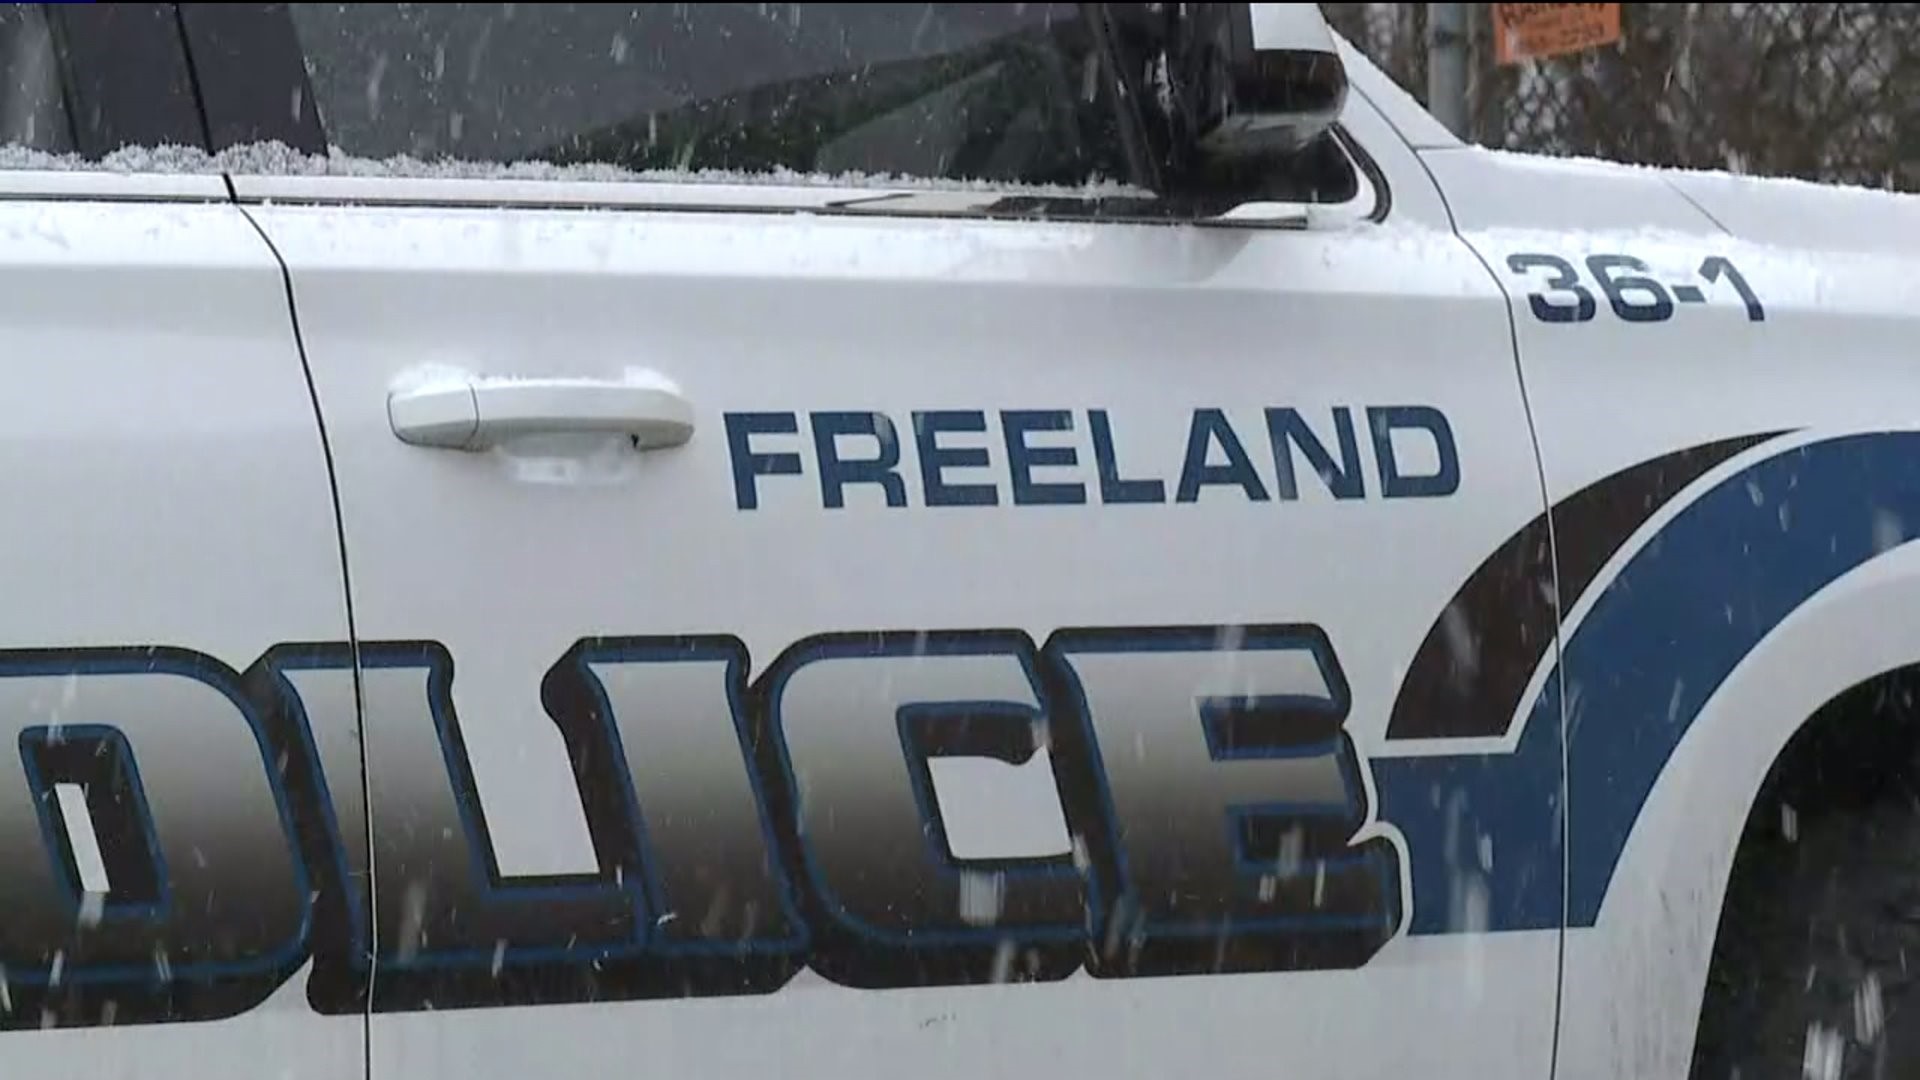 Rumors have been swirling around Freeland's police department. At a council meeting, officials told residents they are working to keep their officers.